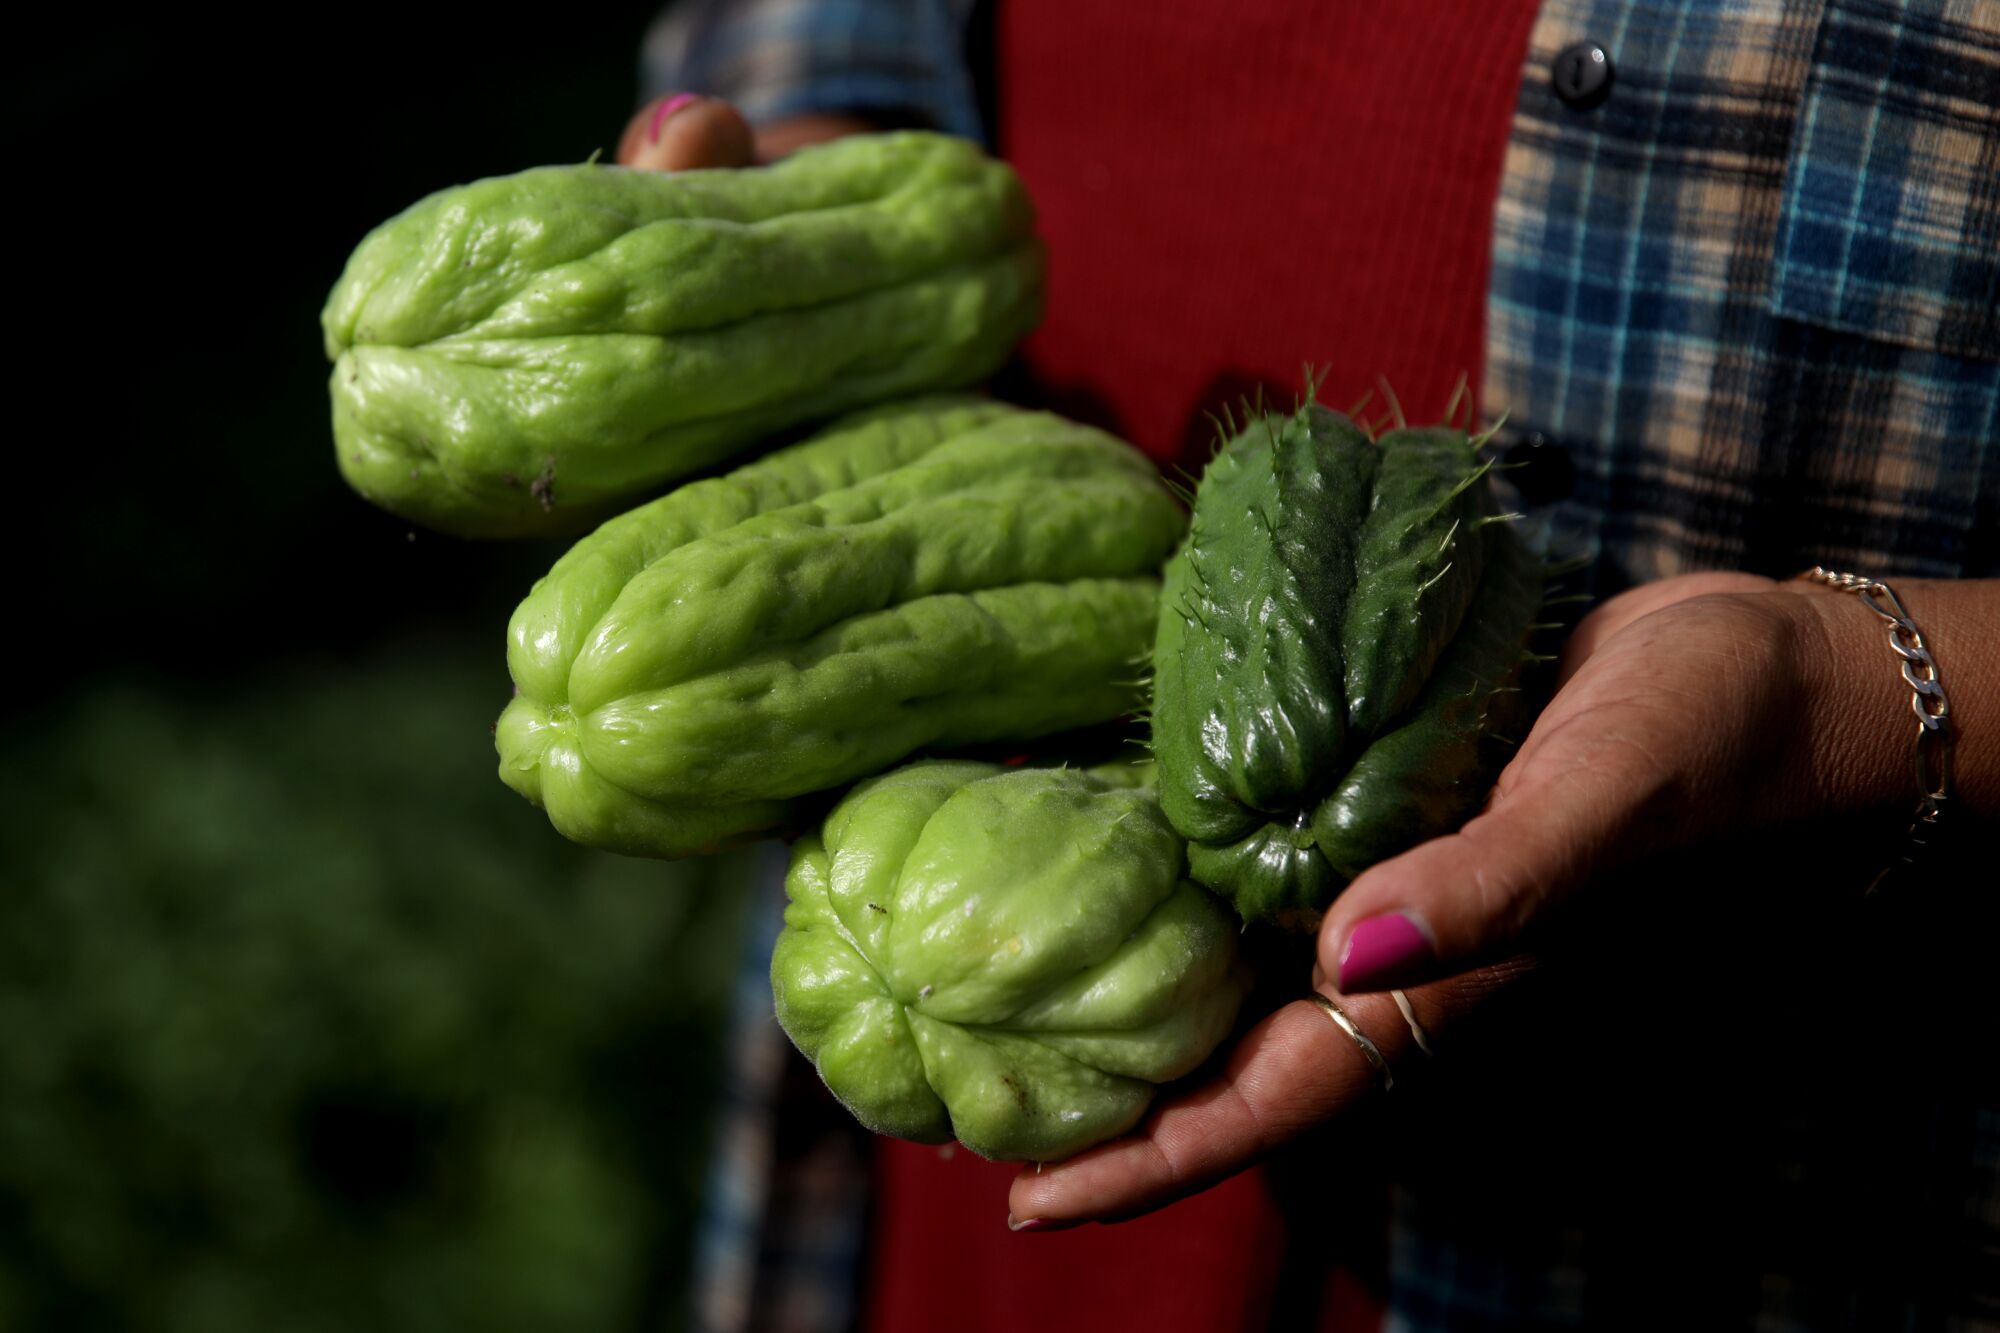 Ana Miguel keeps chayote out of the garden that she tends.